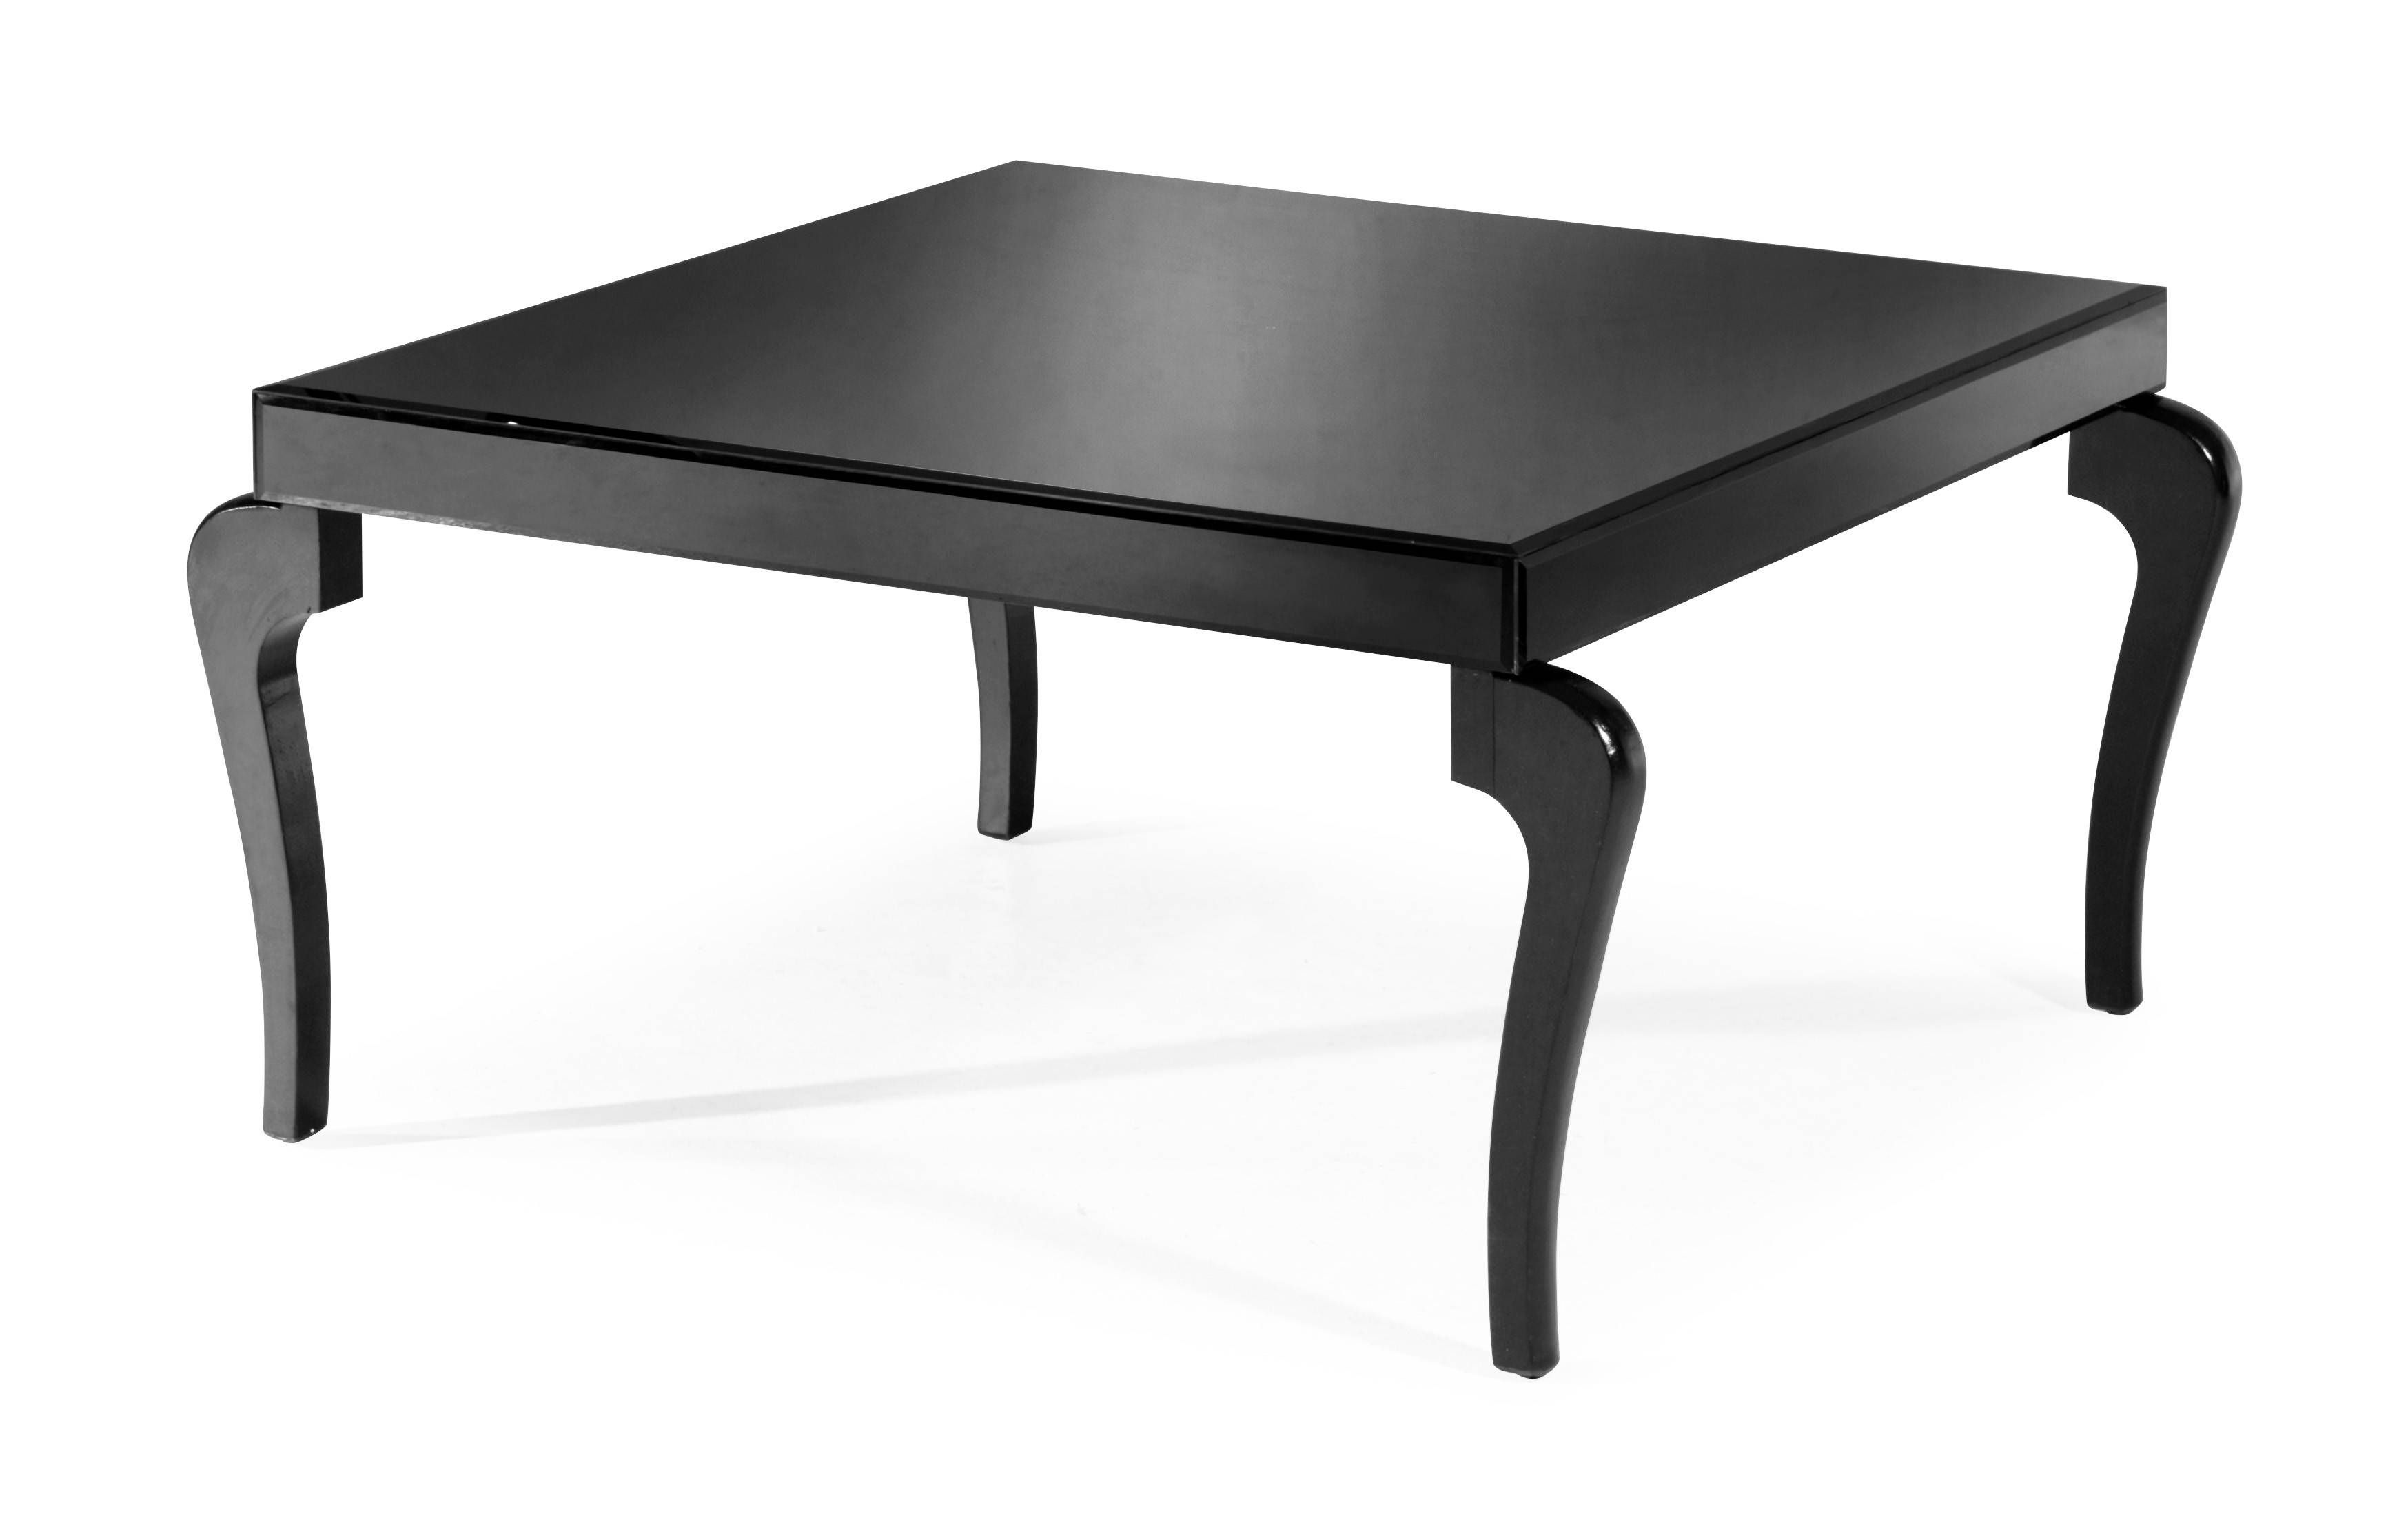 Zuo Modern 850021 Zuo Modern Voila Coffee Table Black Pertaining To Big Black Coffee Tables (View 17 of 30)